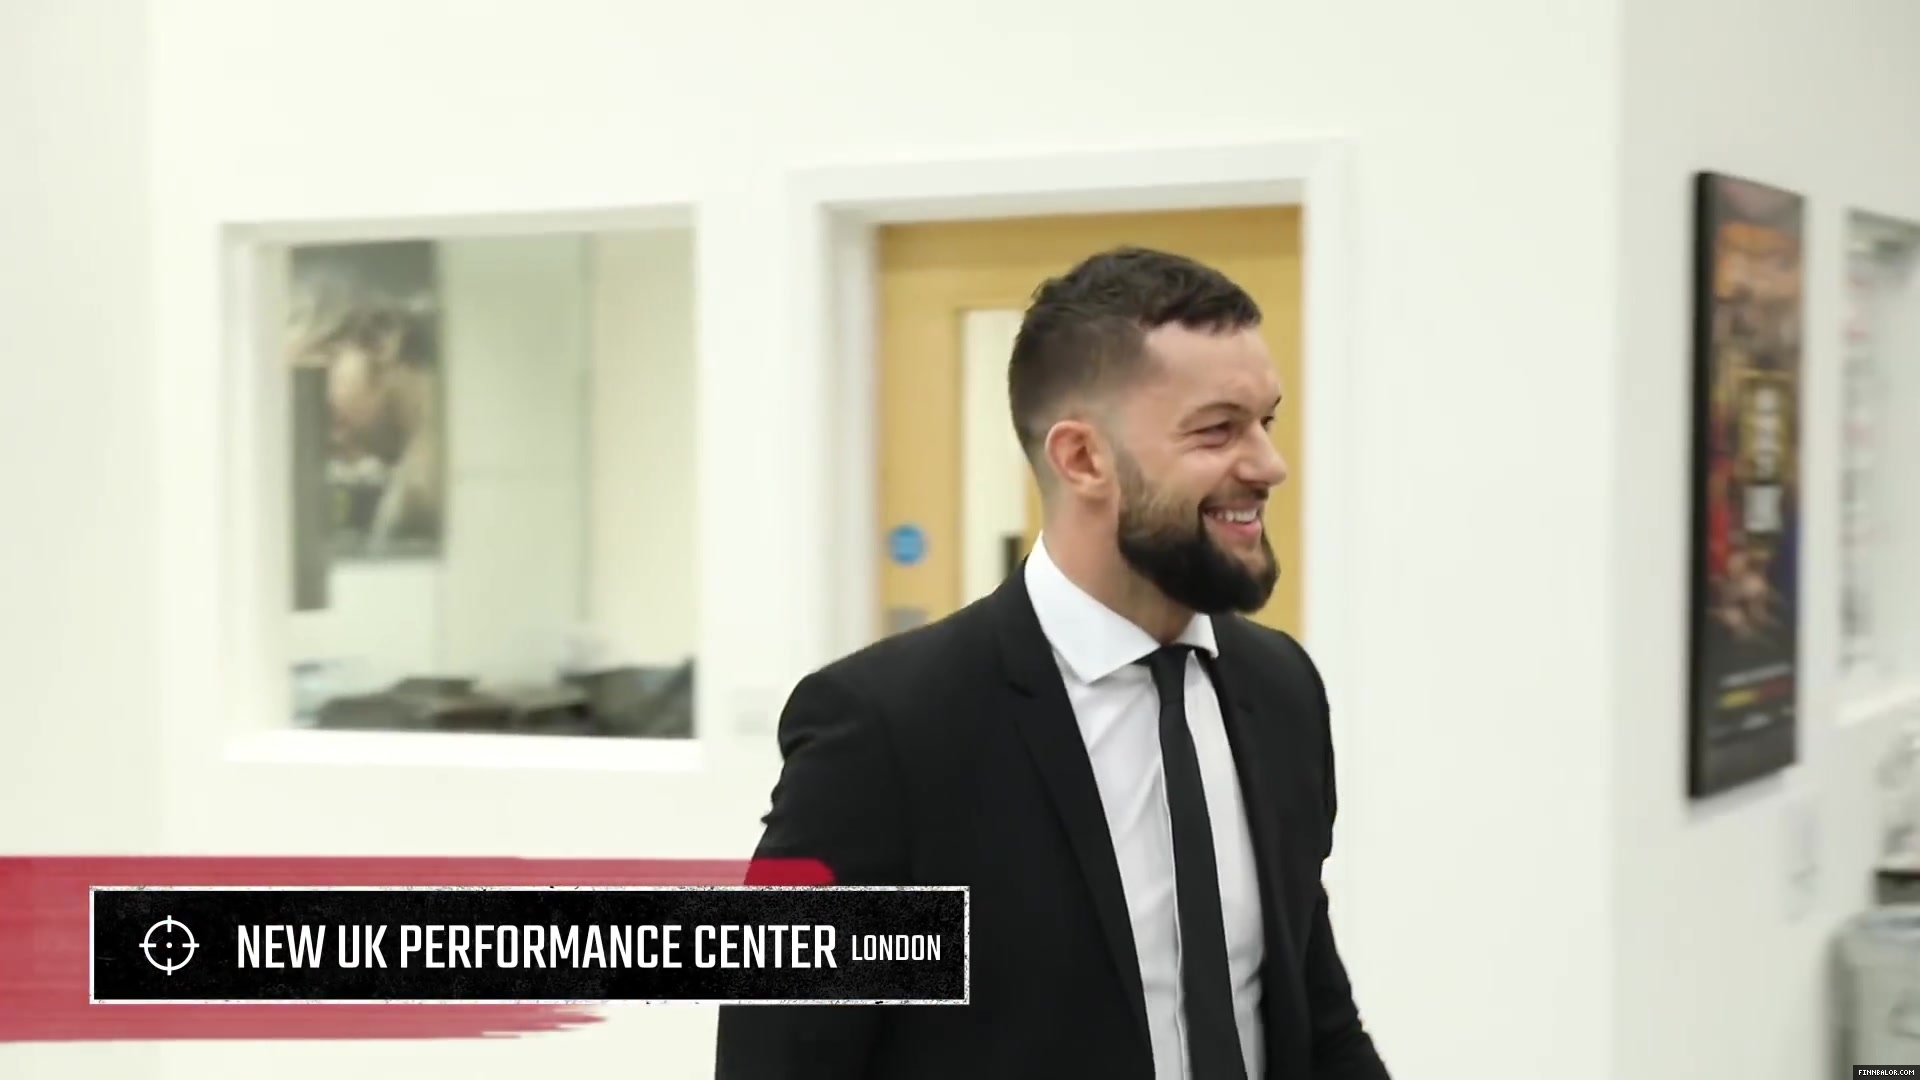 WWE_Superstar_FINN_BALOR_joins_MOUSTACHE_MOUNTAIN_at_the_opening_of_the_NXT_UK_PC_015.jpg